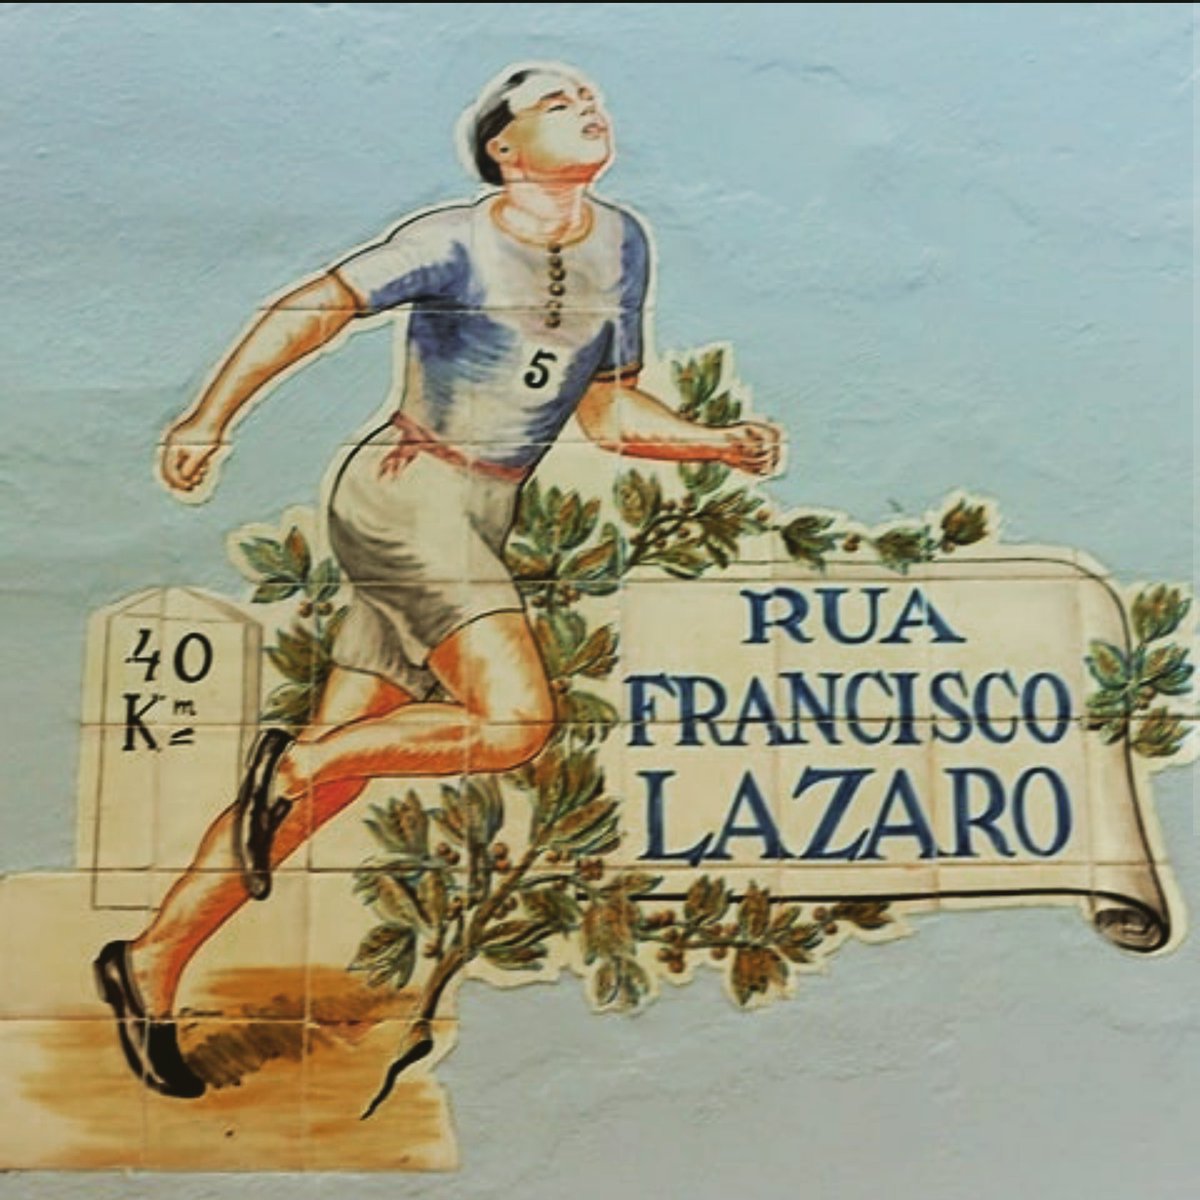 #Portugal  had a #marathon runner who died during the competition in the #1912 #olympic #games. #FranciscoLazaro dehydrated and didn't stop, thus falling into a coma at the end of the race.A #street in #Lisbon recalls his name. #marathonman #LisboaDesaparecida #MarinaTavaresDias